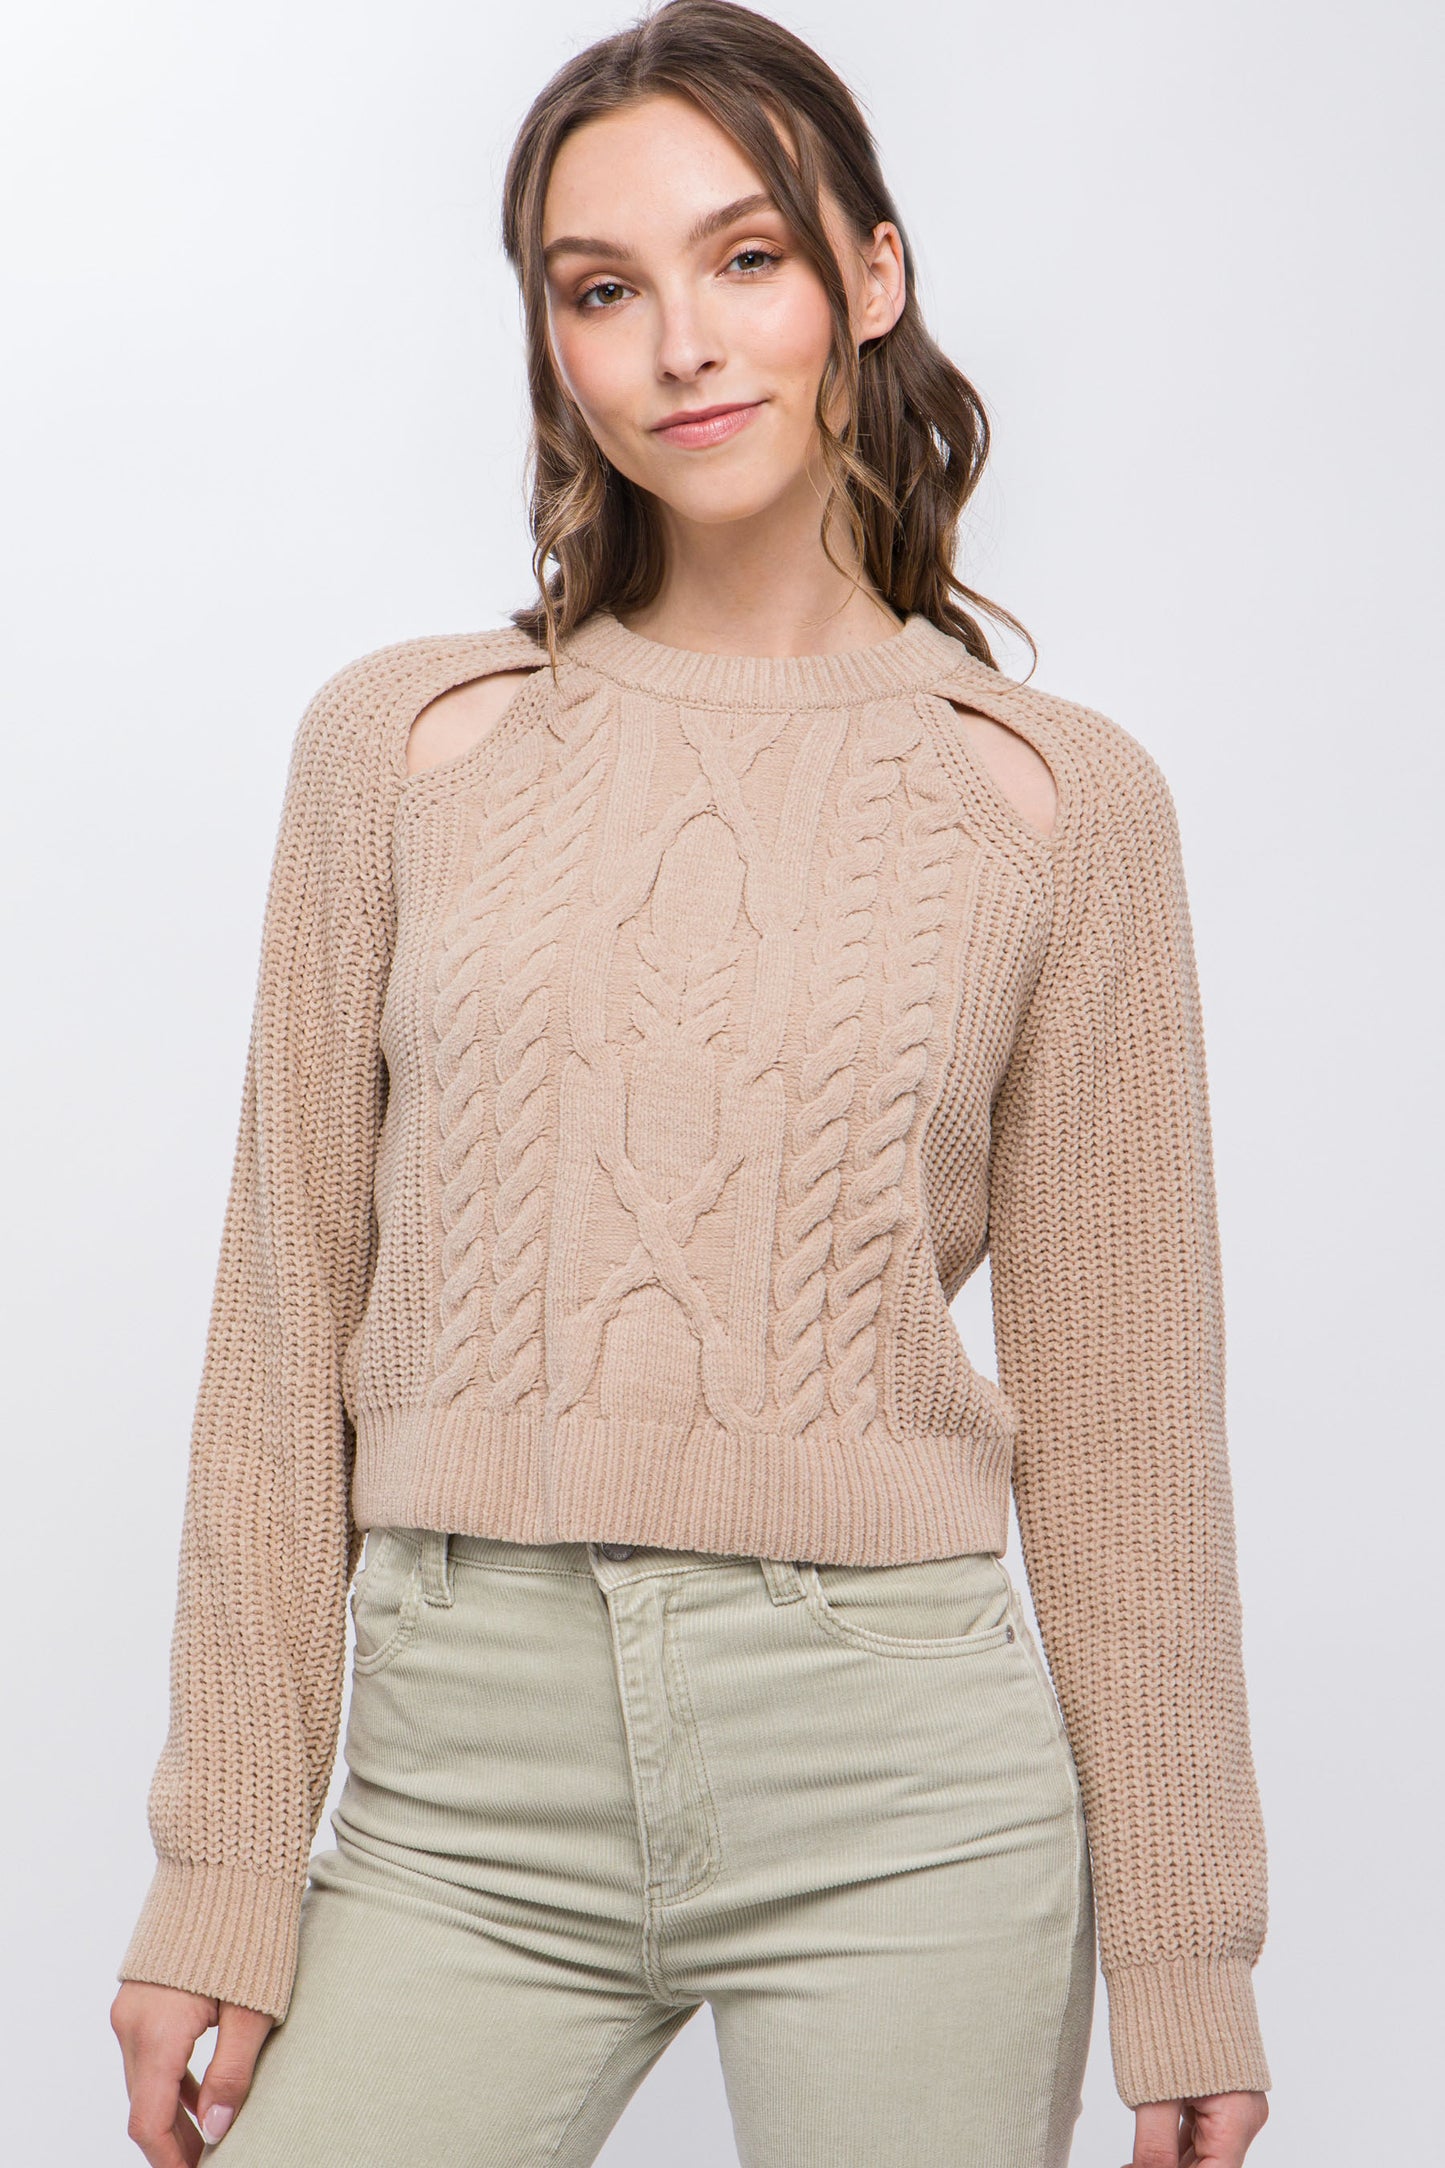 Women's Knit Pullover Sweater With Cold Shoulder Detail